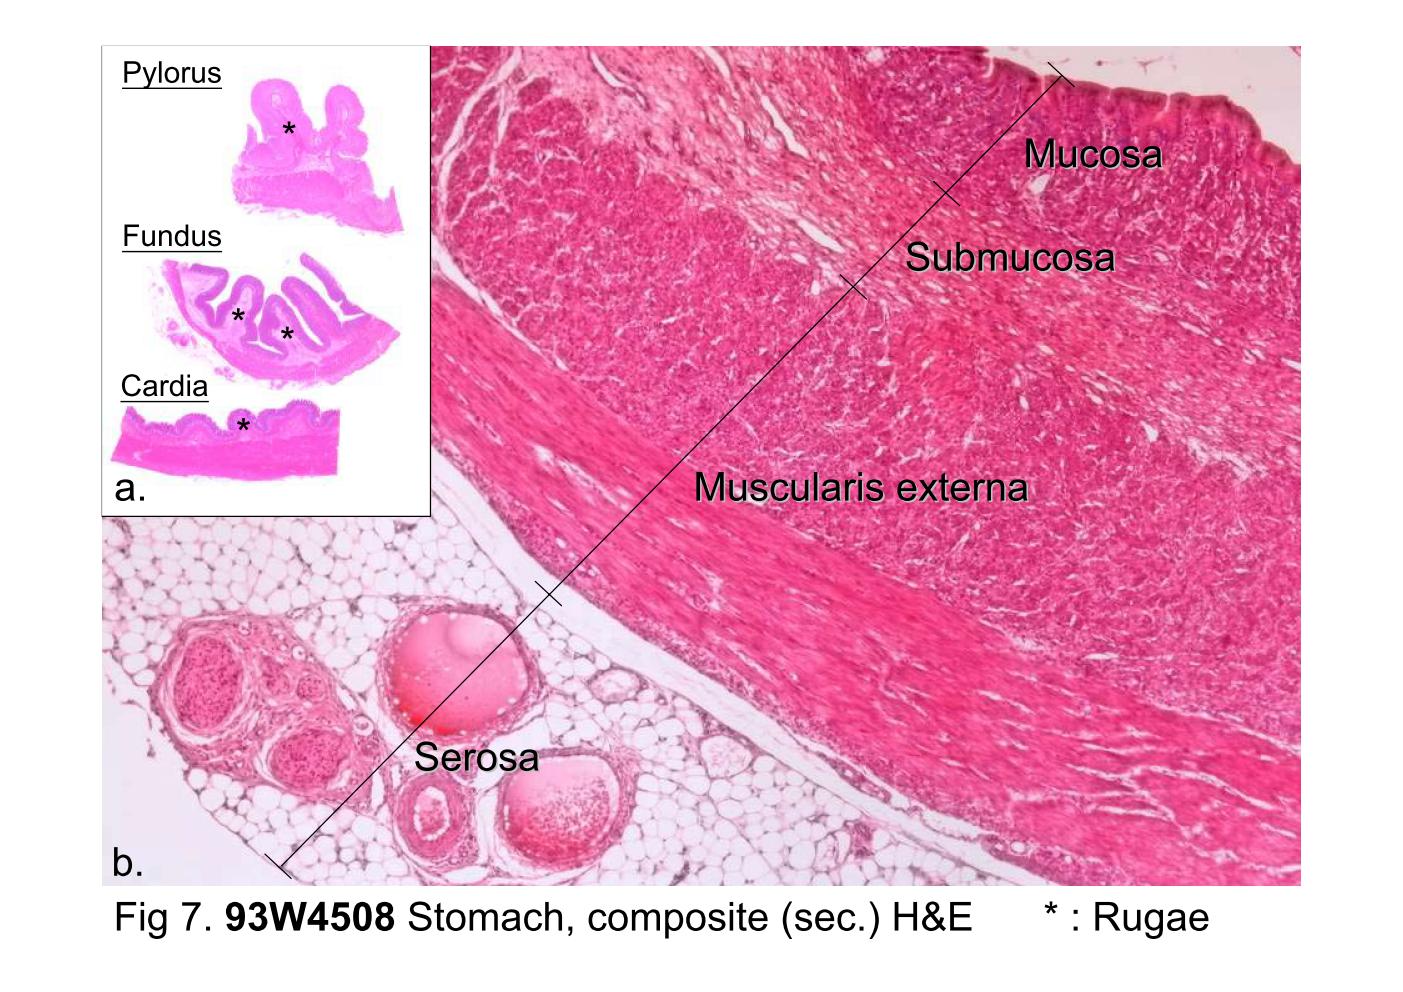 block10-1_17.jpg - Fig 7. 93W4508 Stomach, composite (sec.) H&E.Three regions of the stomach are shown in this slide: upper,pylorus; middle, fundus; lower, cardia (as shown in Fig 7a).As with other parts of the gastrointestinal tract, the wall of thestomach consists of four layers: a mucosa, a submucosa, amuscularis externa, and a serosa. The inner surface of theempty stomach is thrown into long folds referred to as rugae (*).Several such cross-sectioned folds are shown in Fig 7a. Theyconsist of mucosa and submucosa. The rugae are notpermanent folds; they disappear when the stomach wall isstretched, as in the distended stomach.